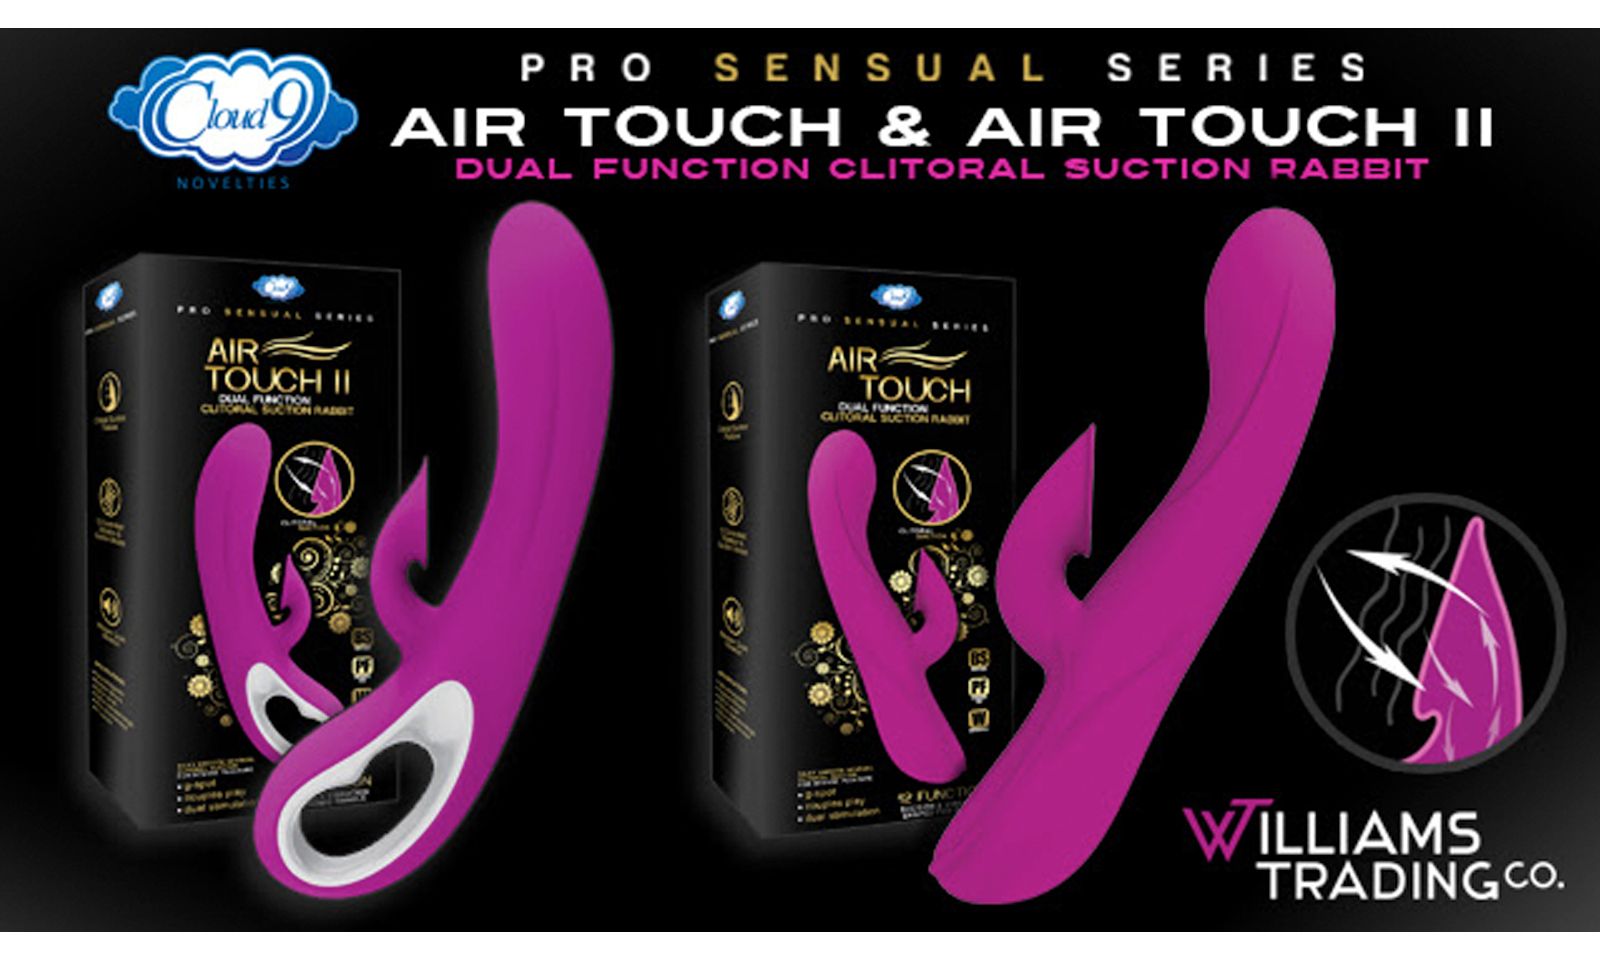 Williams Trading’s Cloud 9 Novelties Debuts Air Touch, Air Touch II